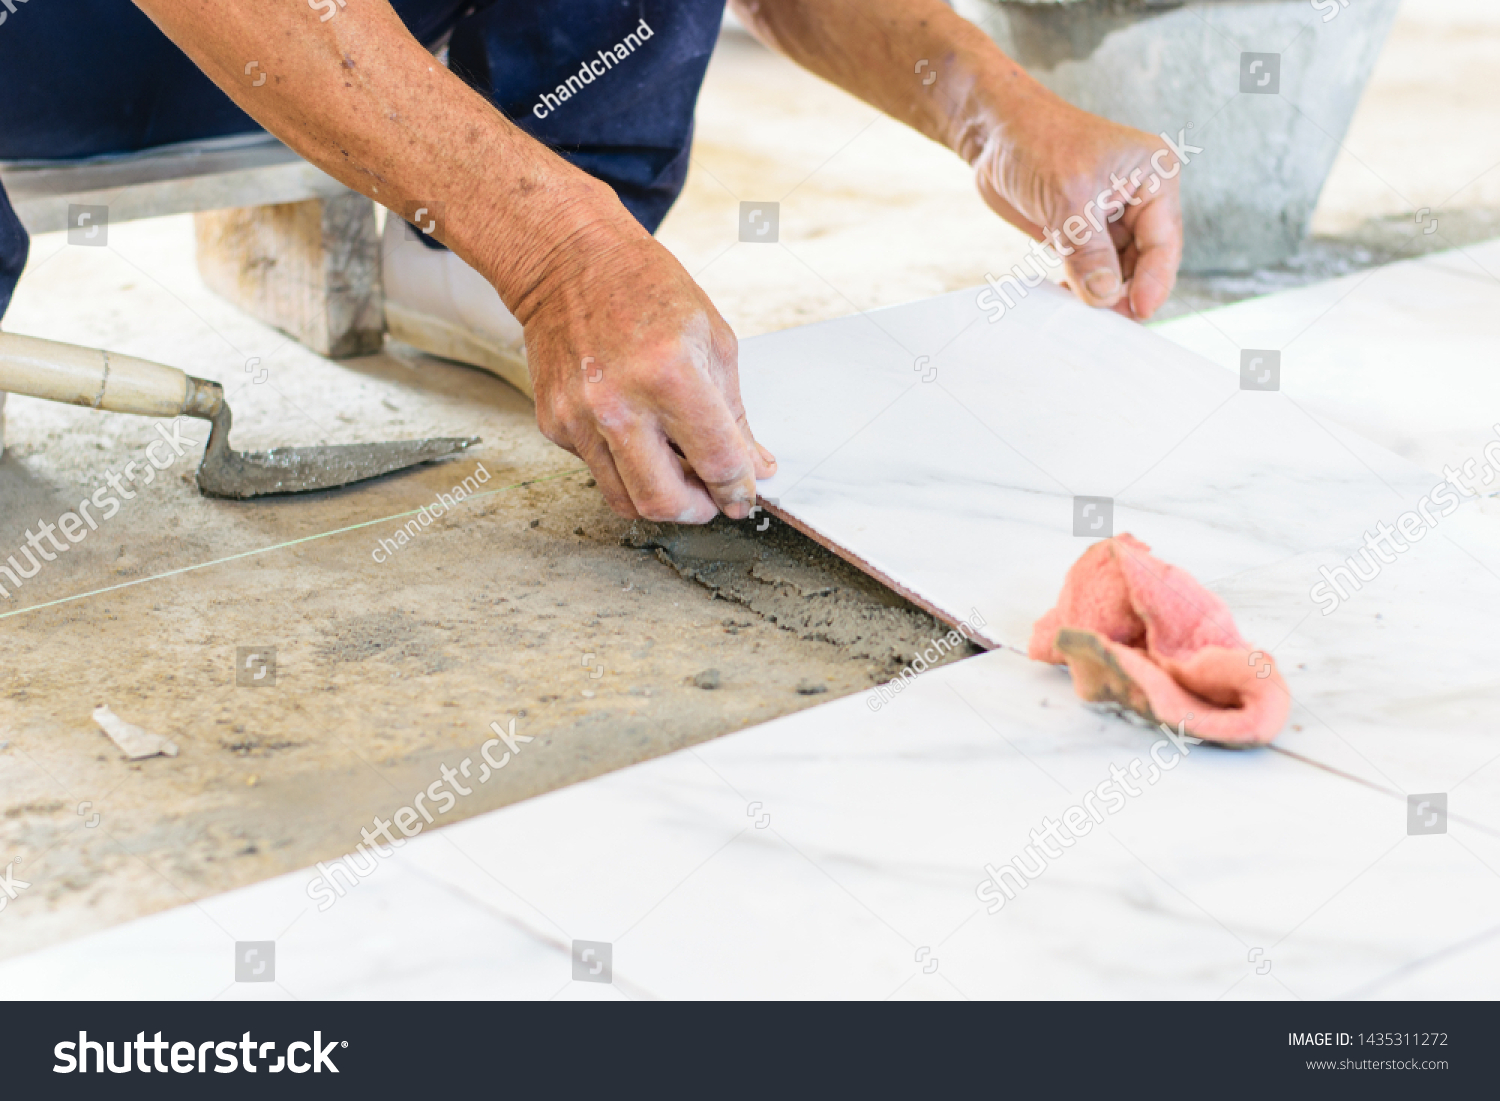 In home construction I am laying tile on the floor material is cement, tiles, buckets, hammers, paving the lap. The commitment, expertise To operate successfully, with next. #1435311272